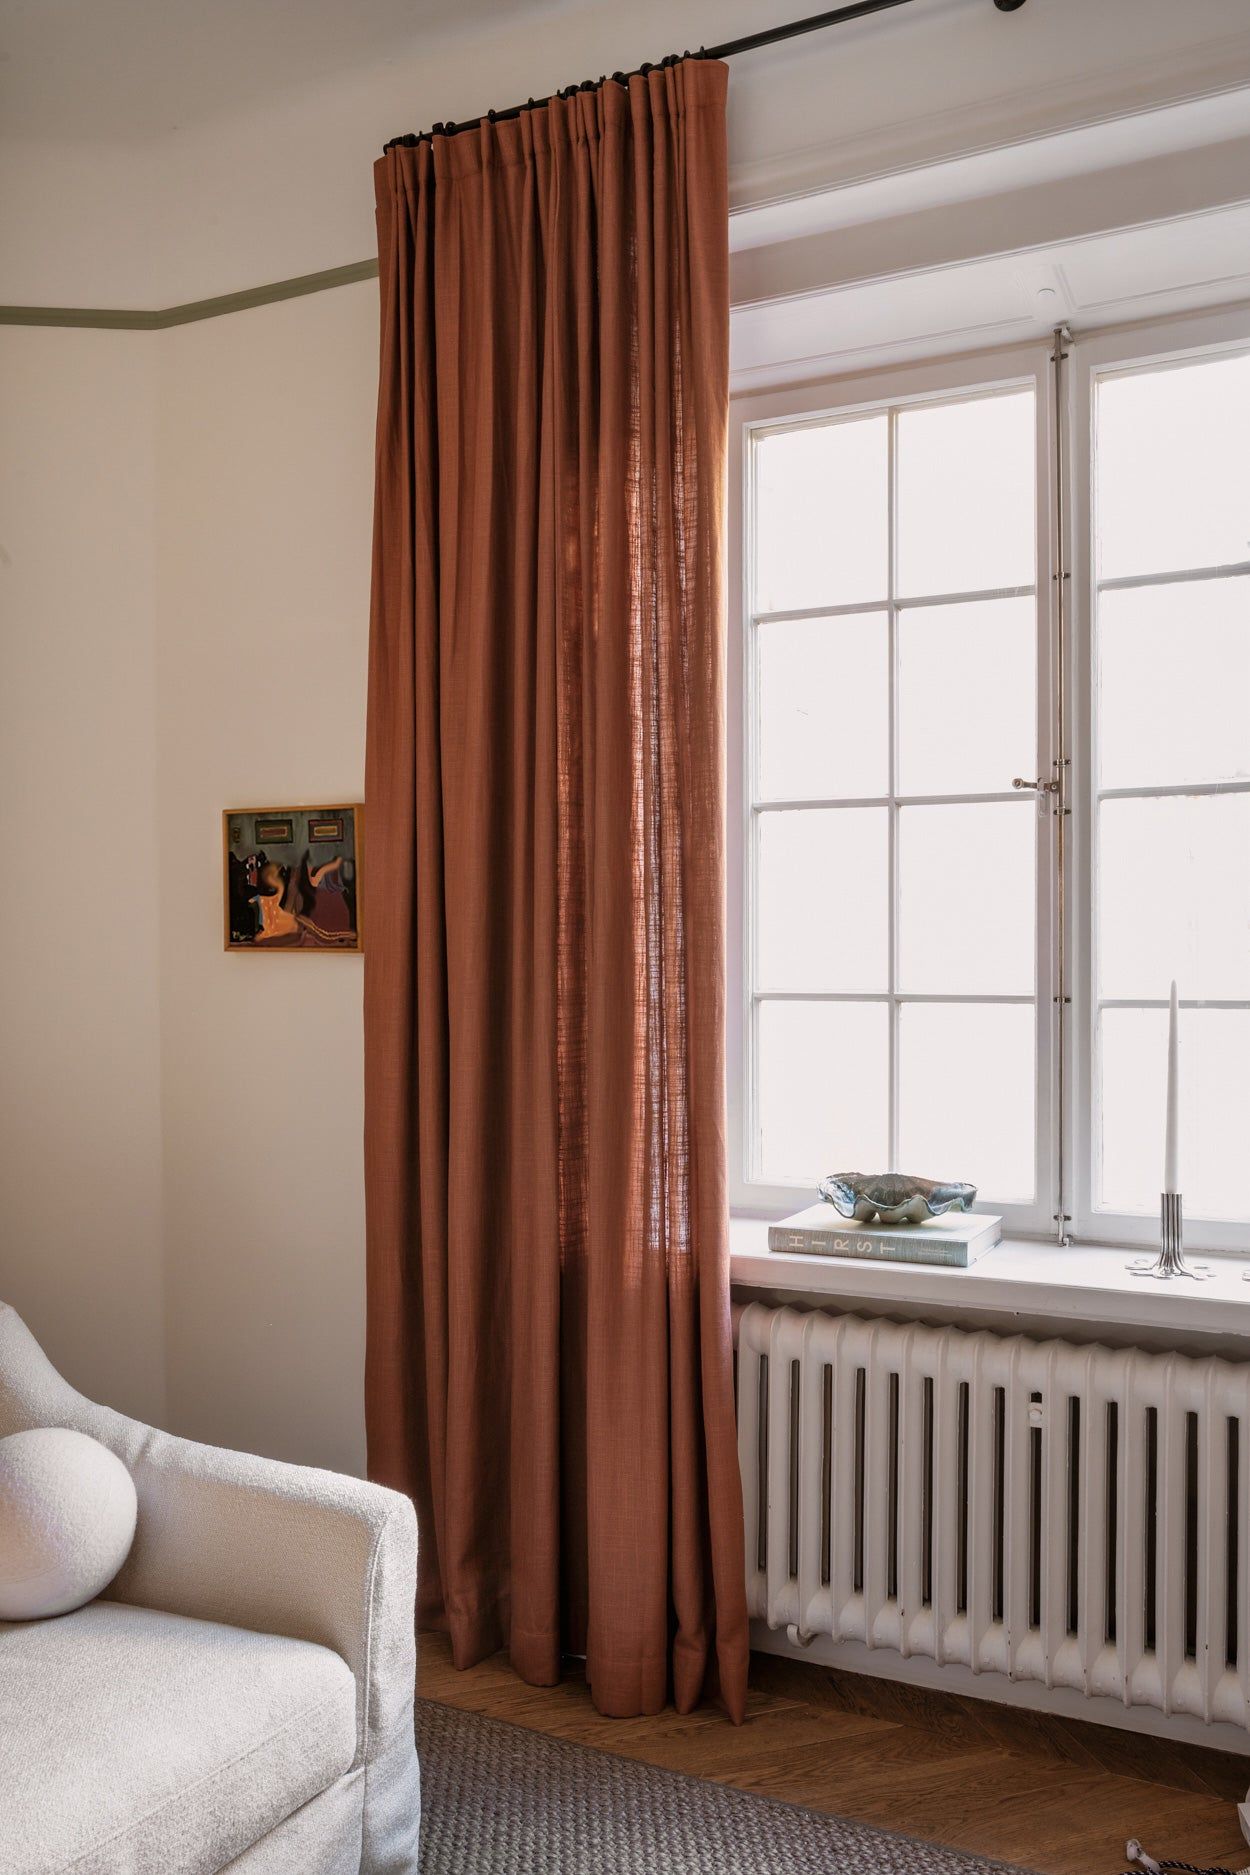 Orange Curtains: Adding Warmth and Vibrancy to Your Space